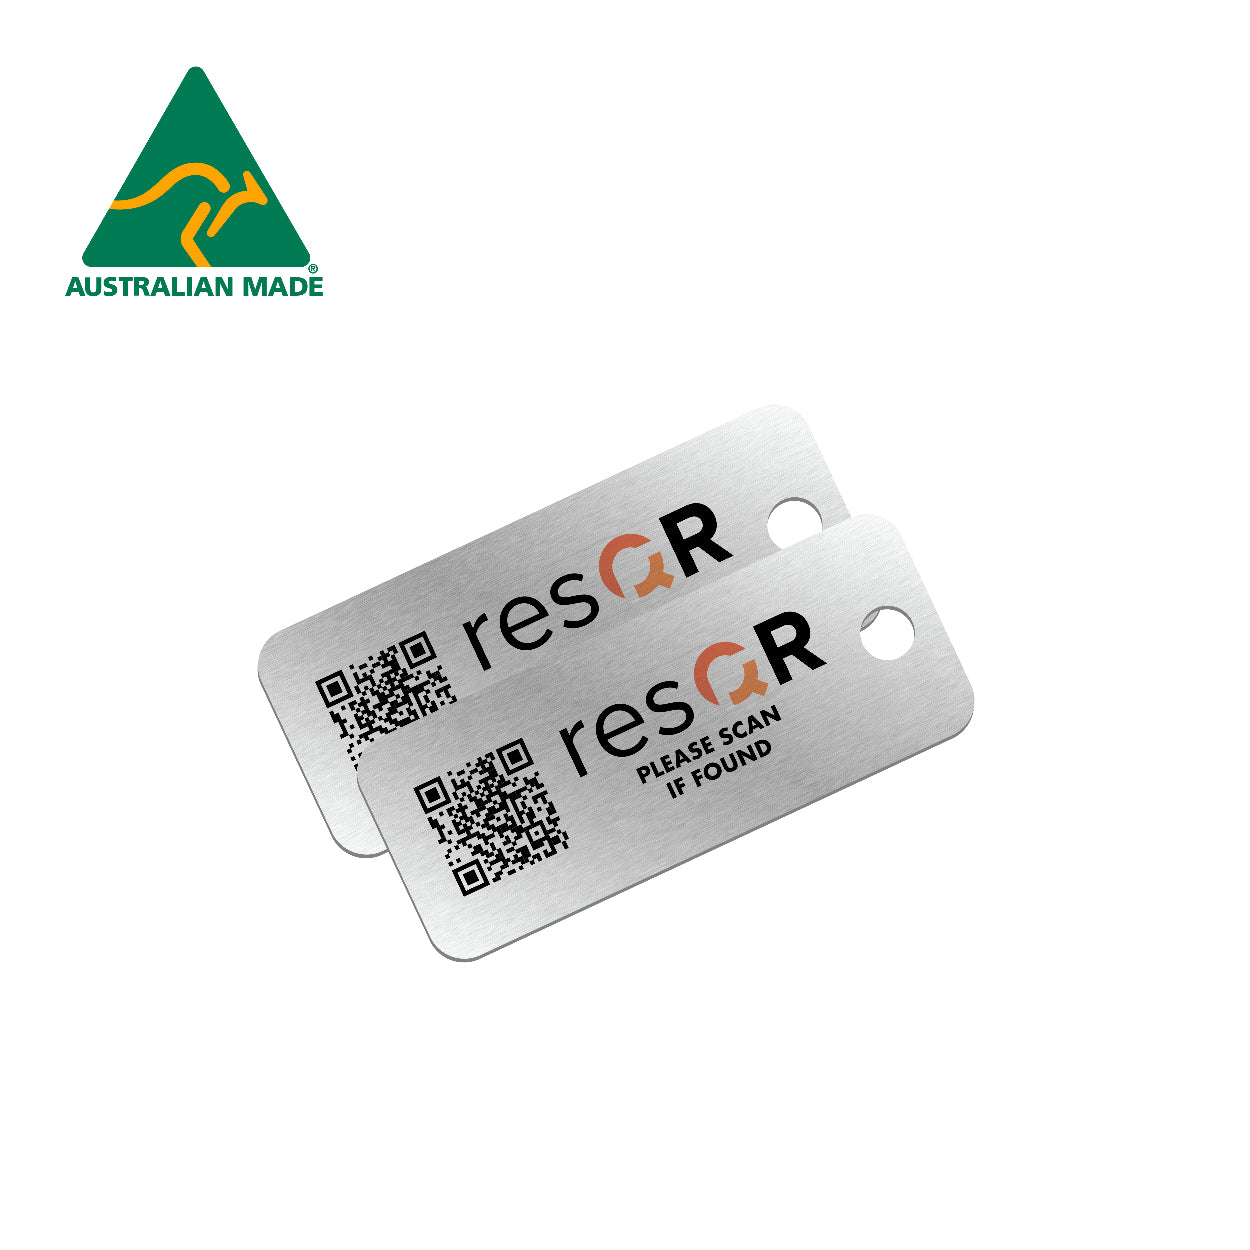 resQR Tag & Sticker Standard Pack - Protect 20 Valuables